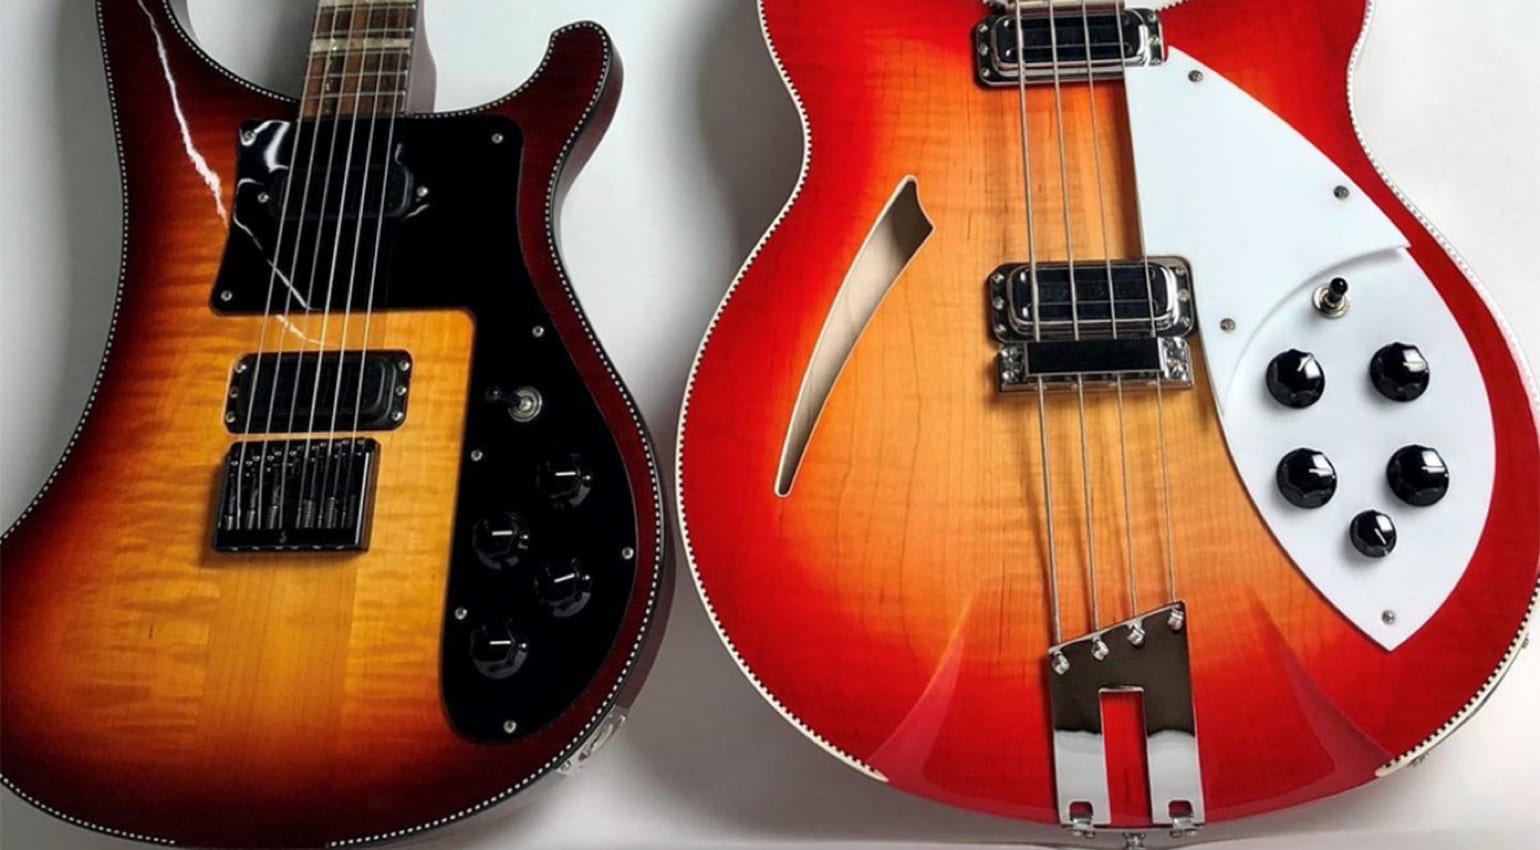 Rickenbacker celebrates 90 years with new guitar and bass models 